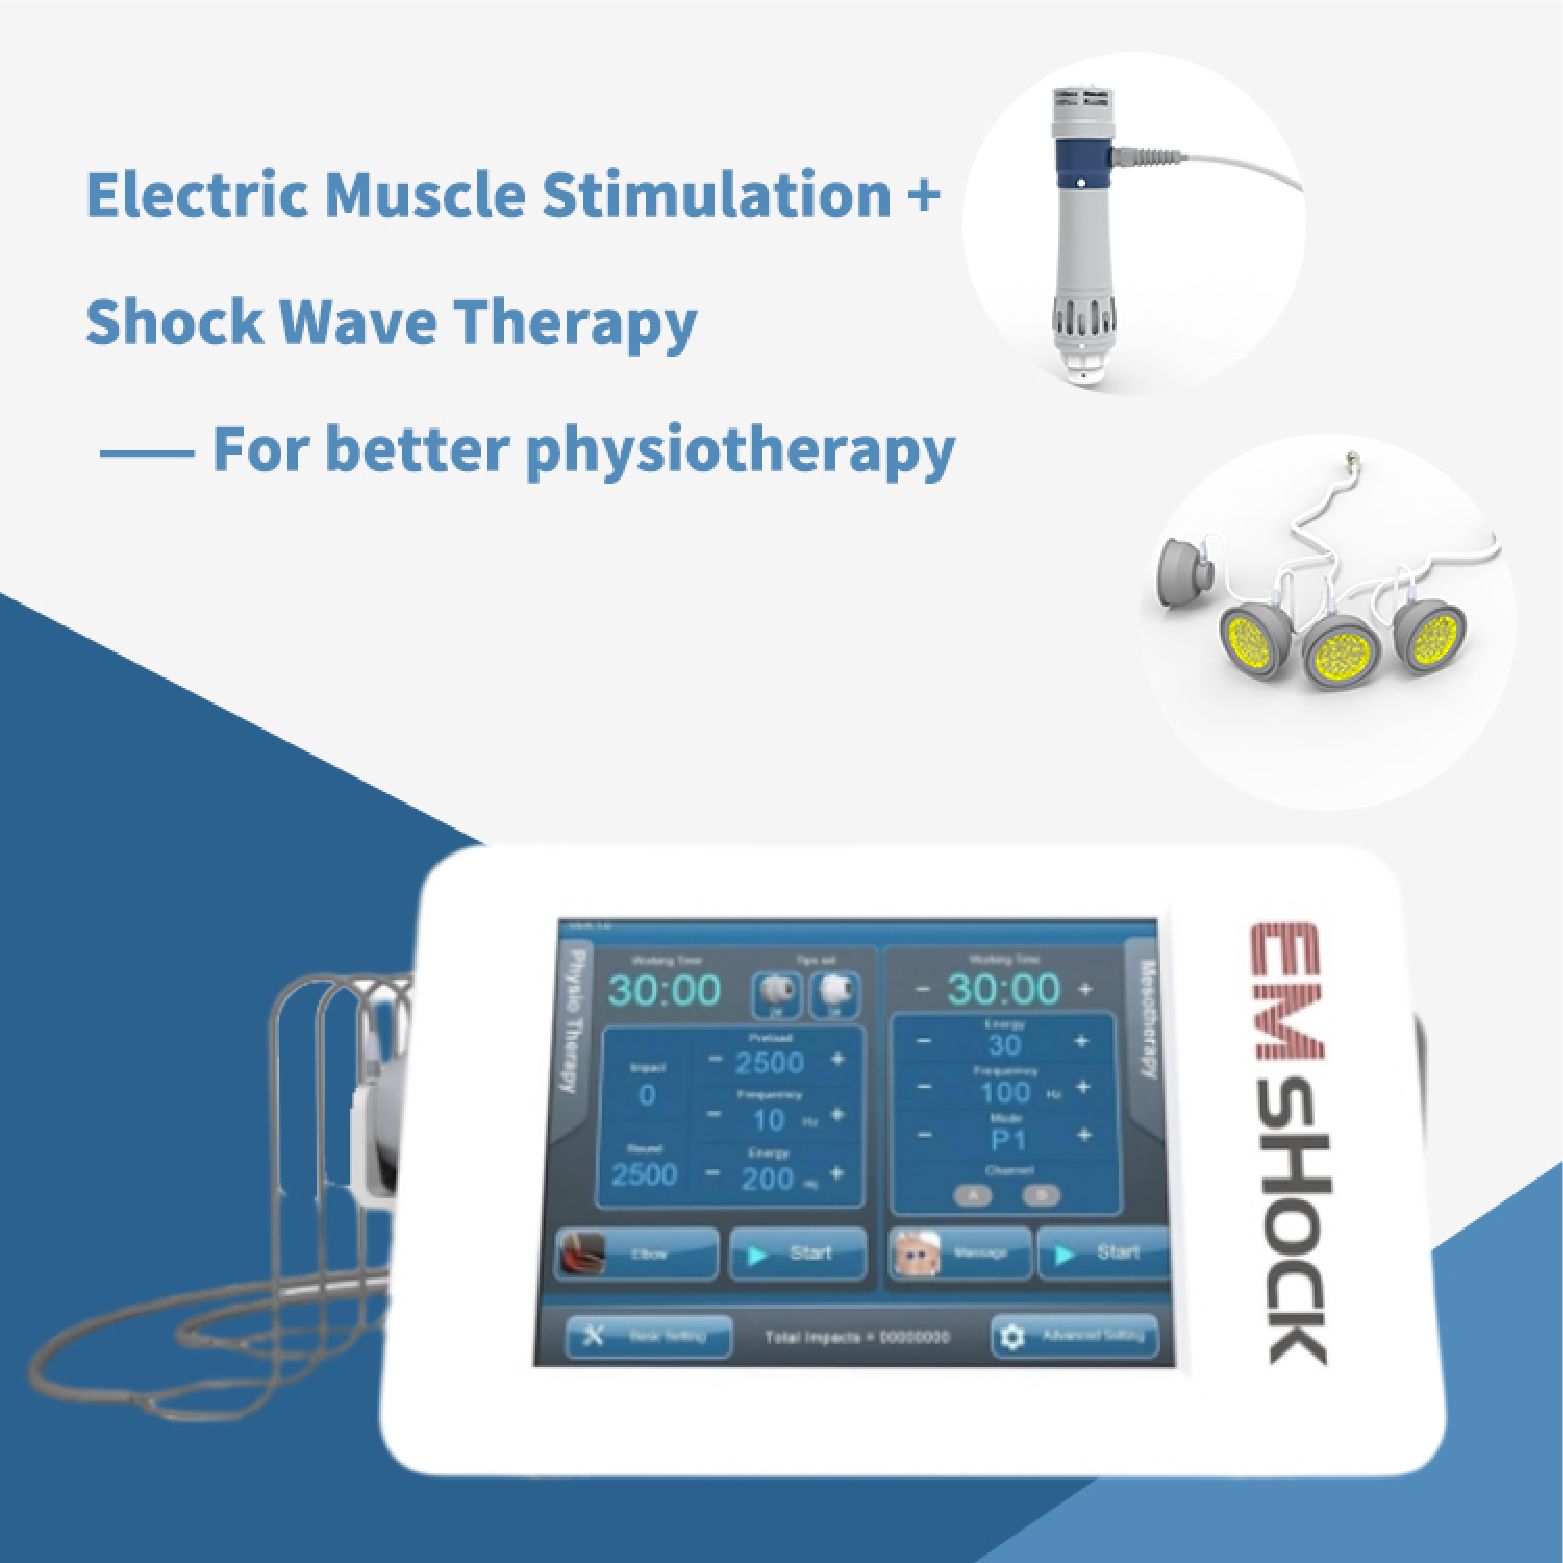 What Are the Benefits of Shockwave Therapy?